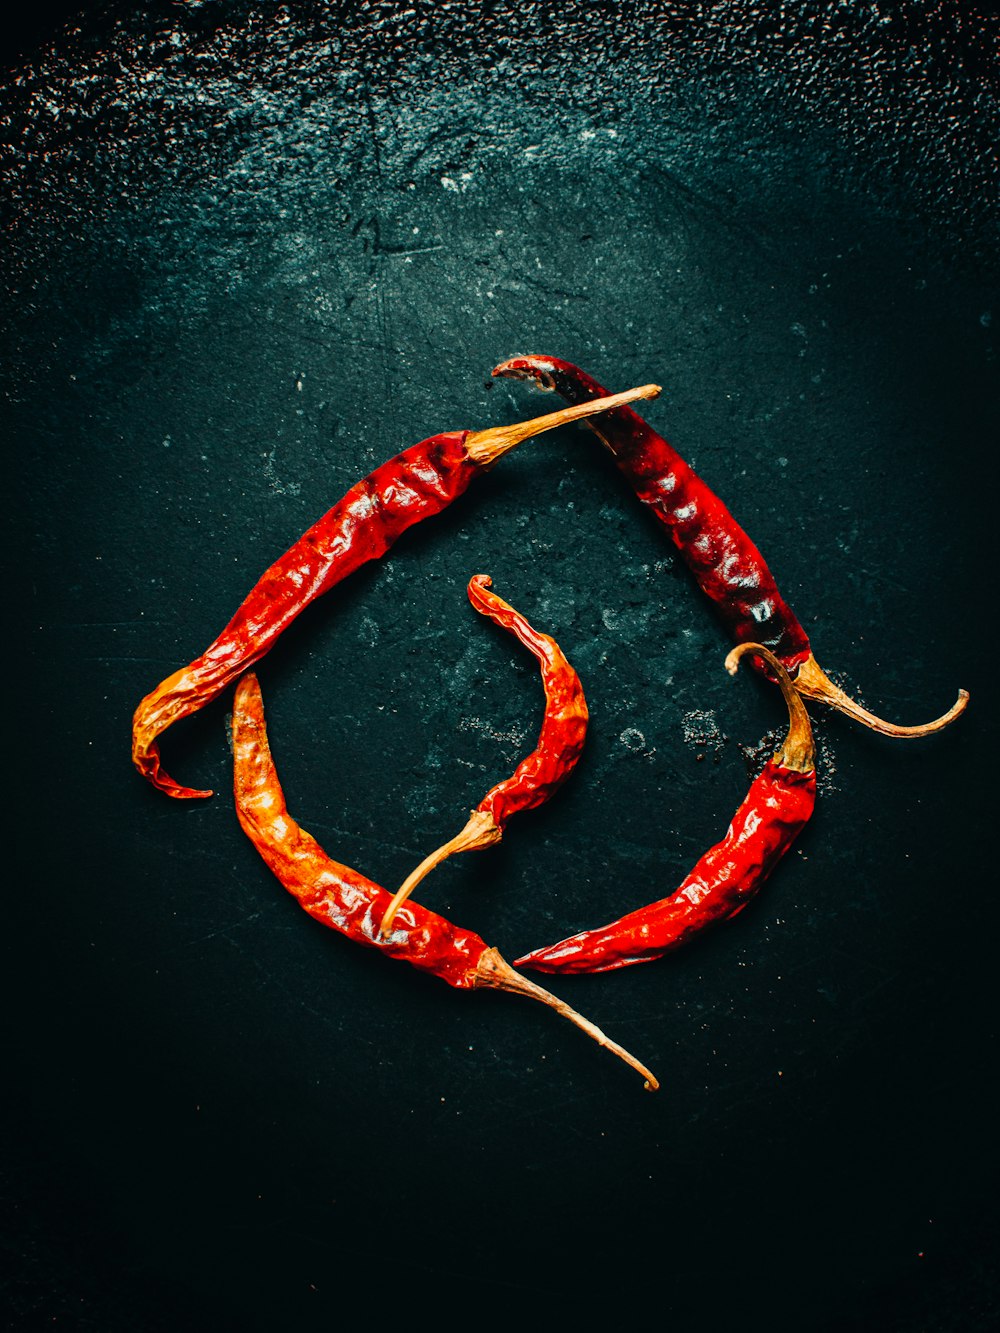 red chili pepper on black surface